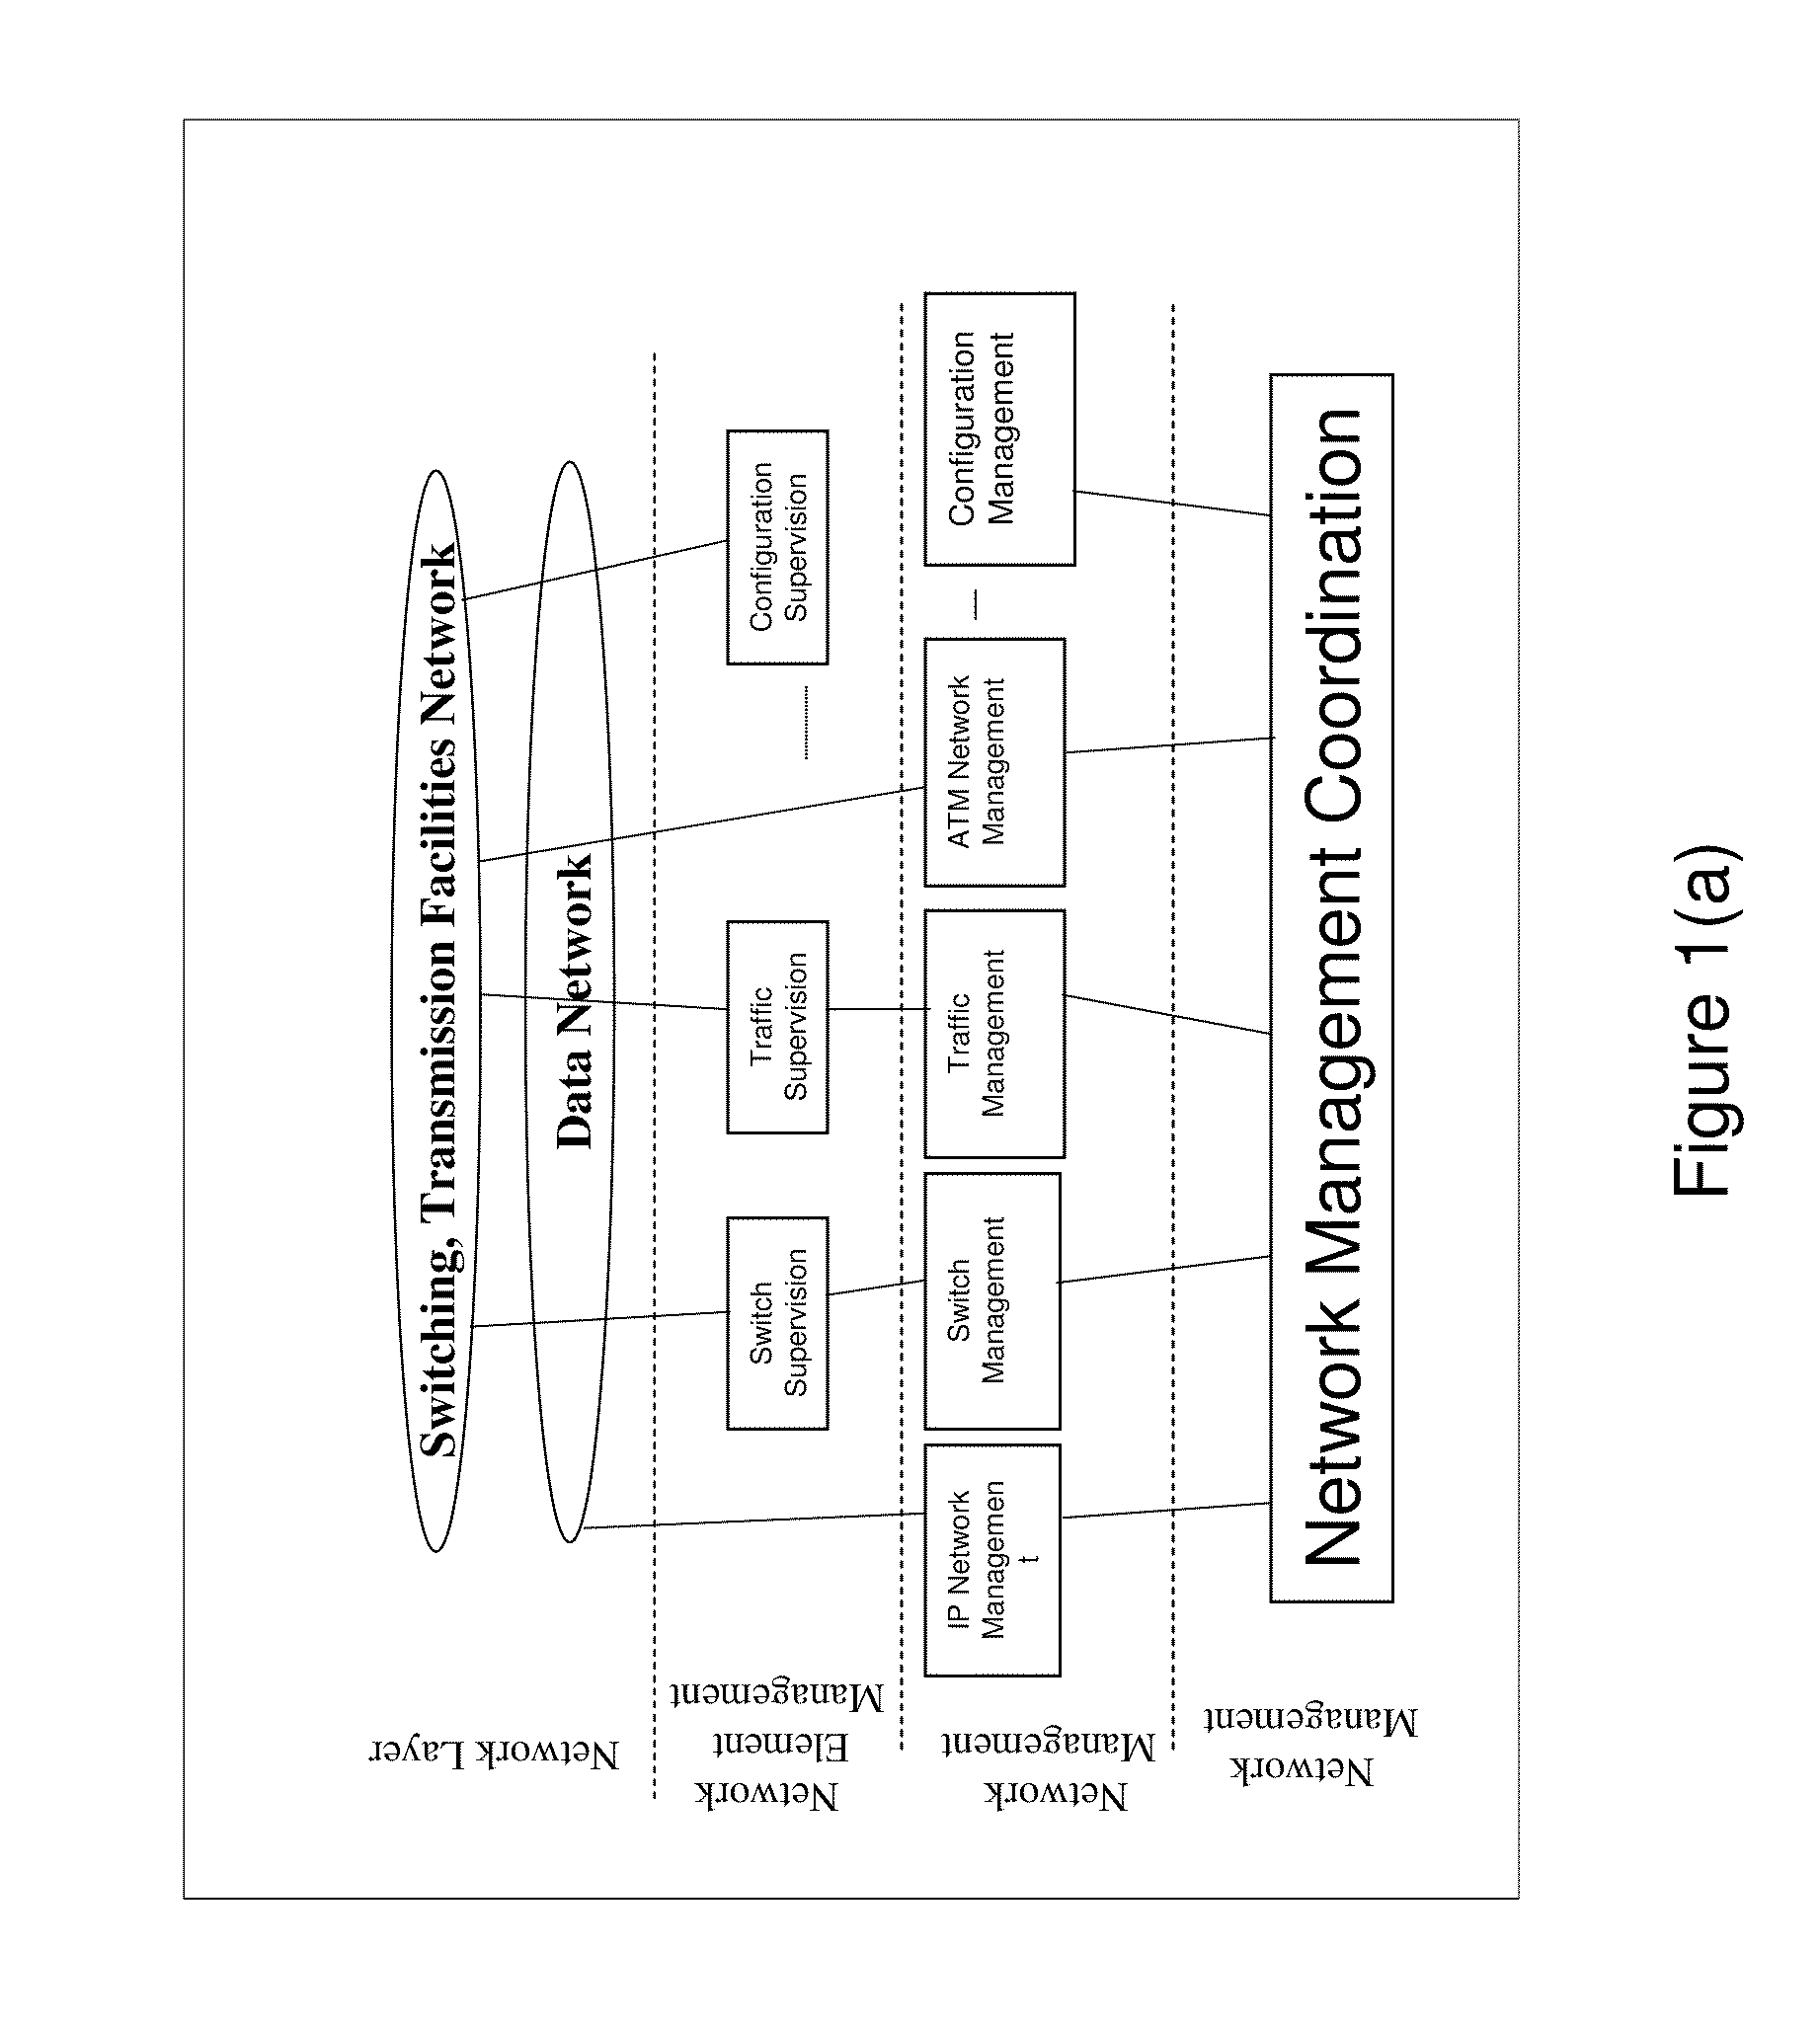 Apparatus and methods for real-time multimedia network traffic management and control in wireless networks